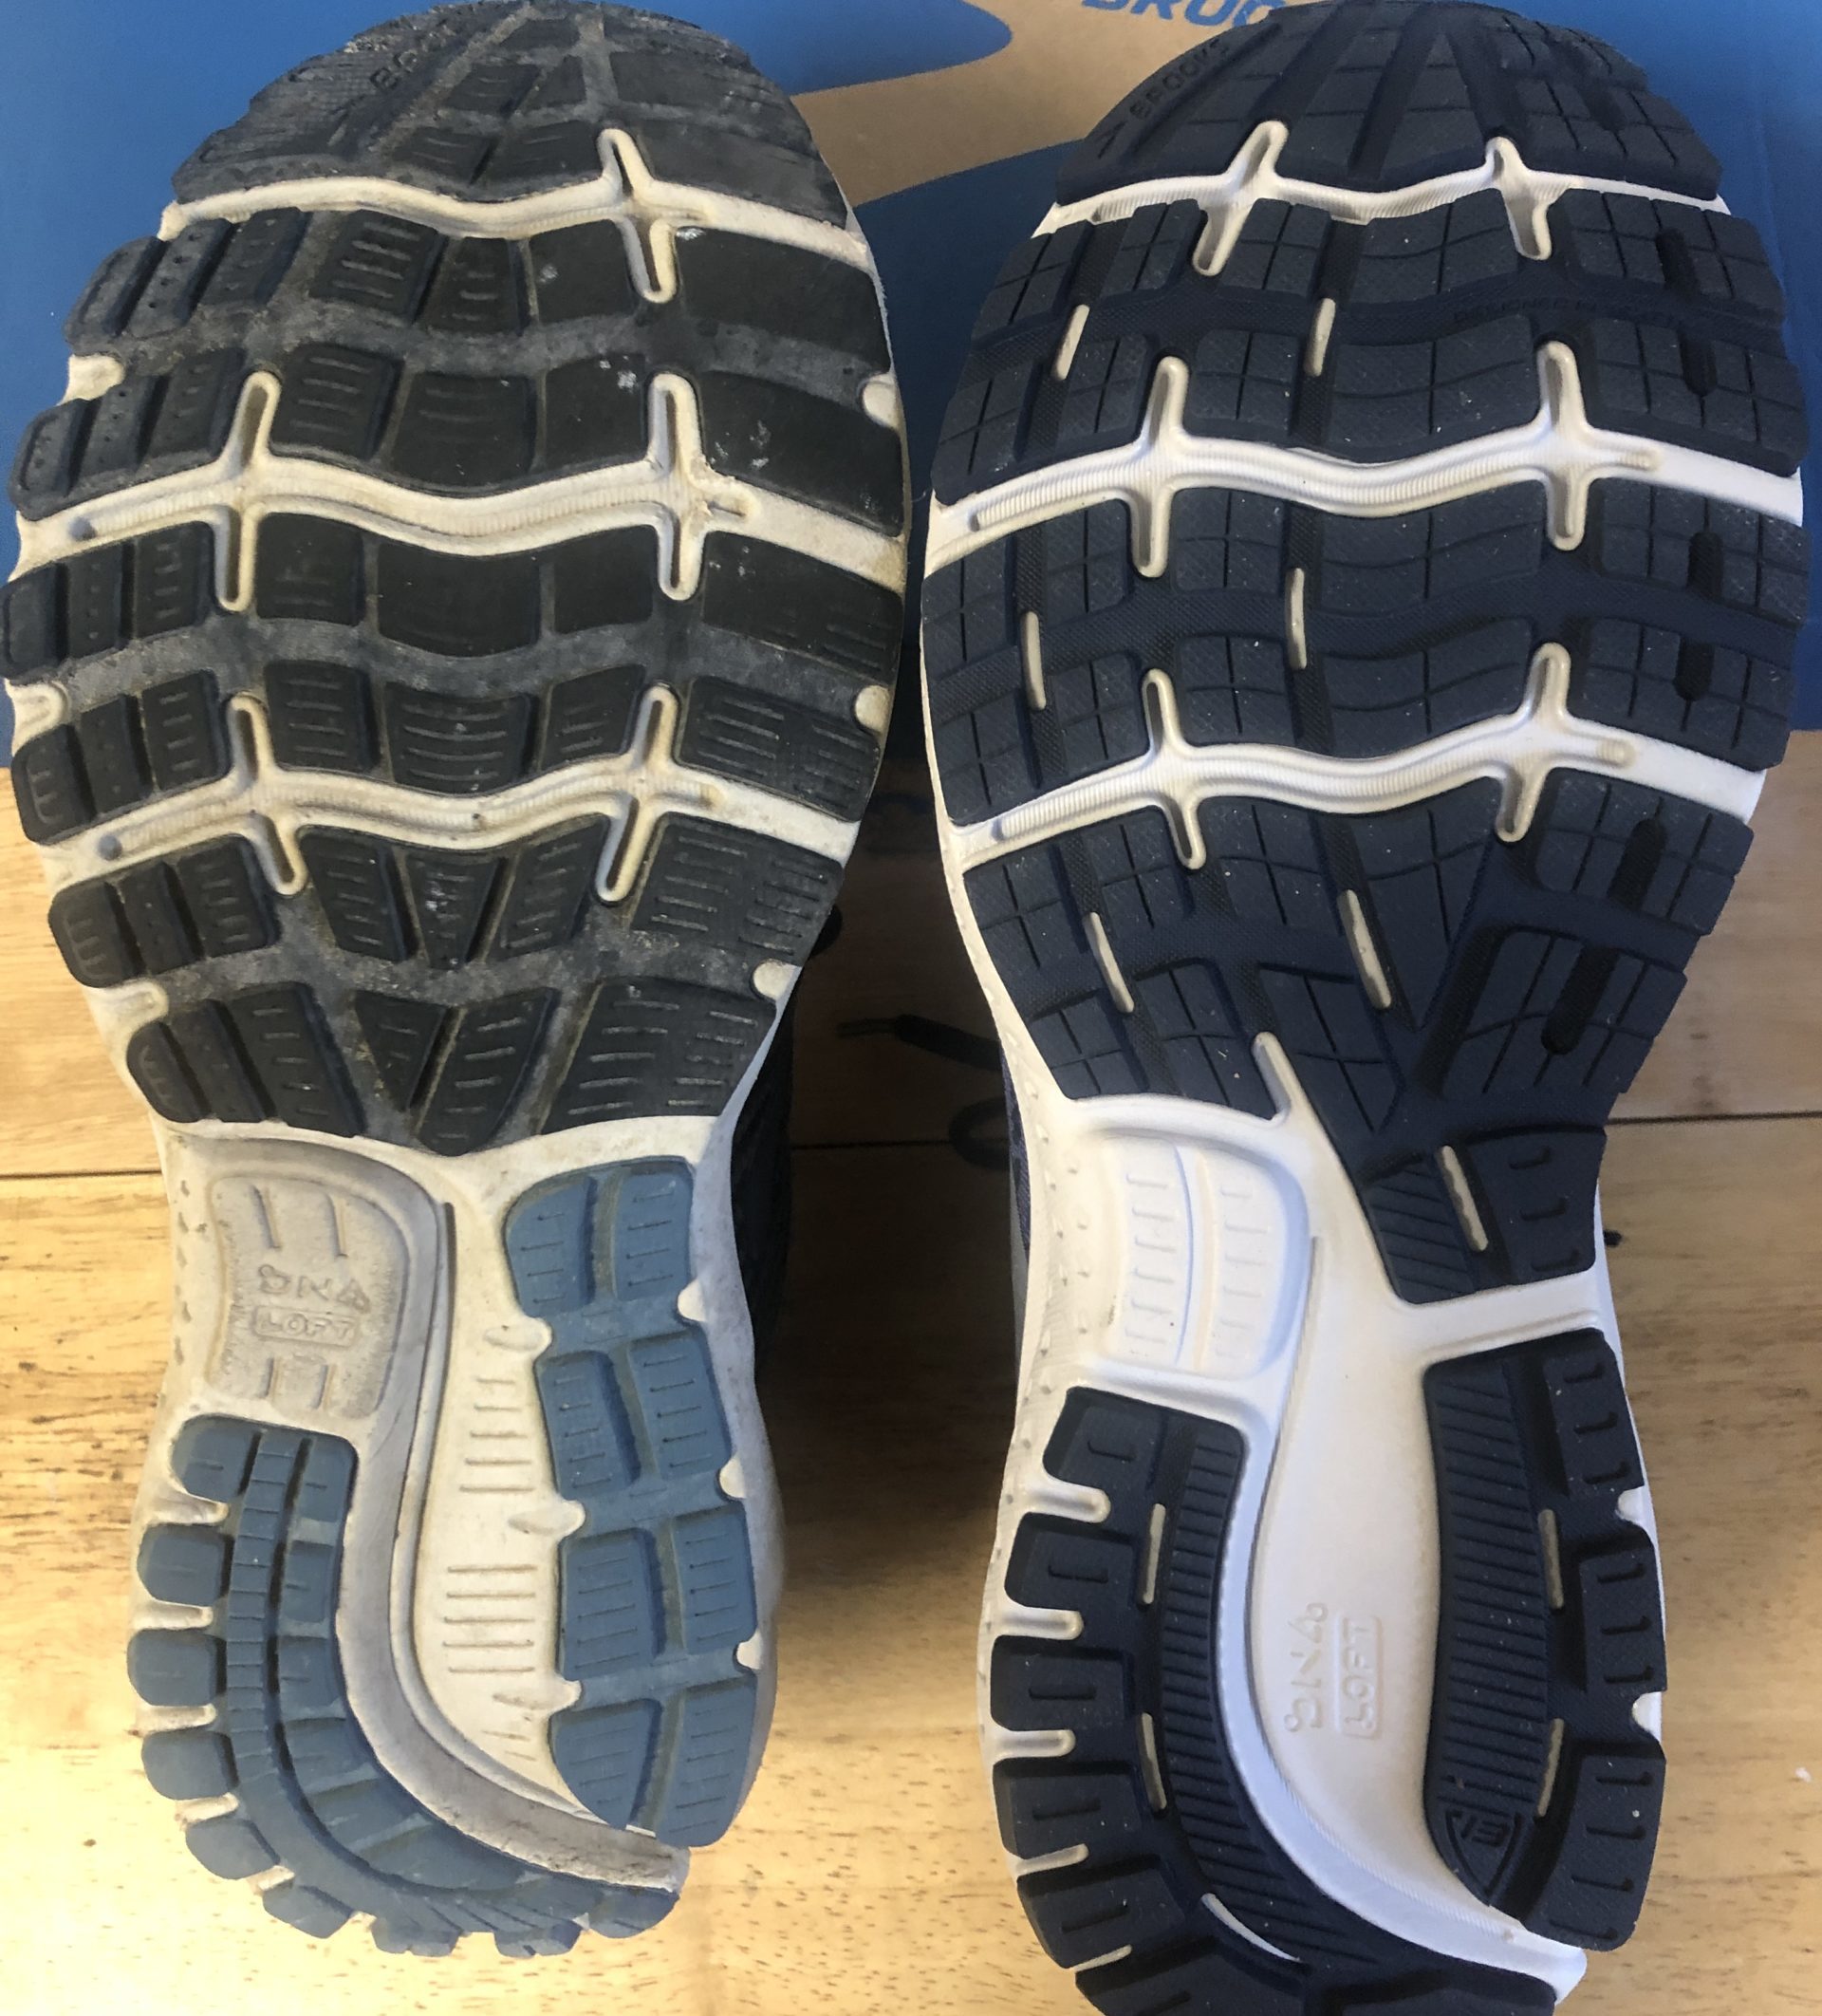 Old shoes versus new shoes sole